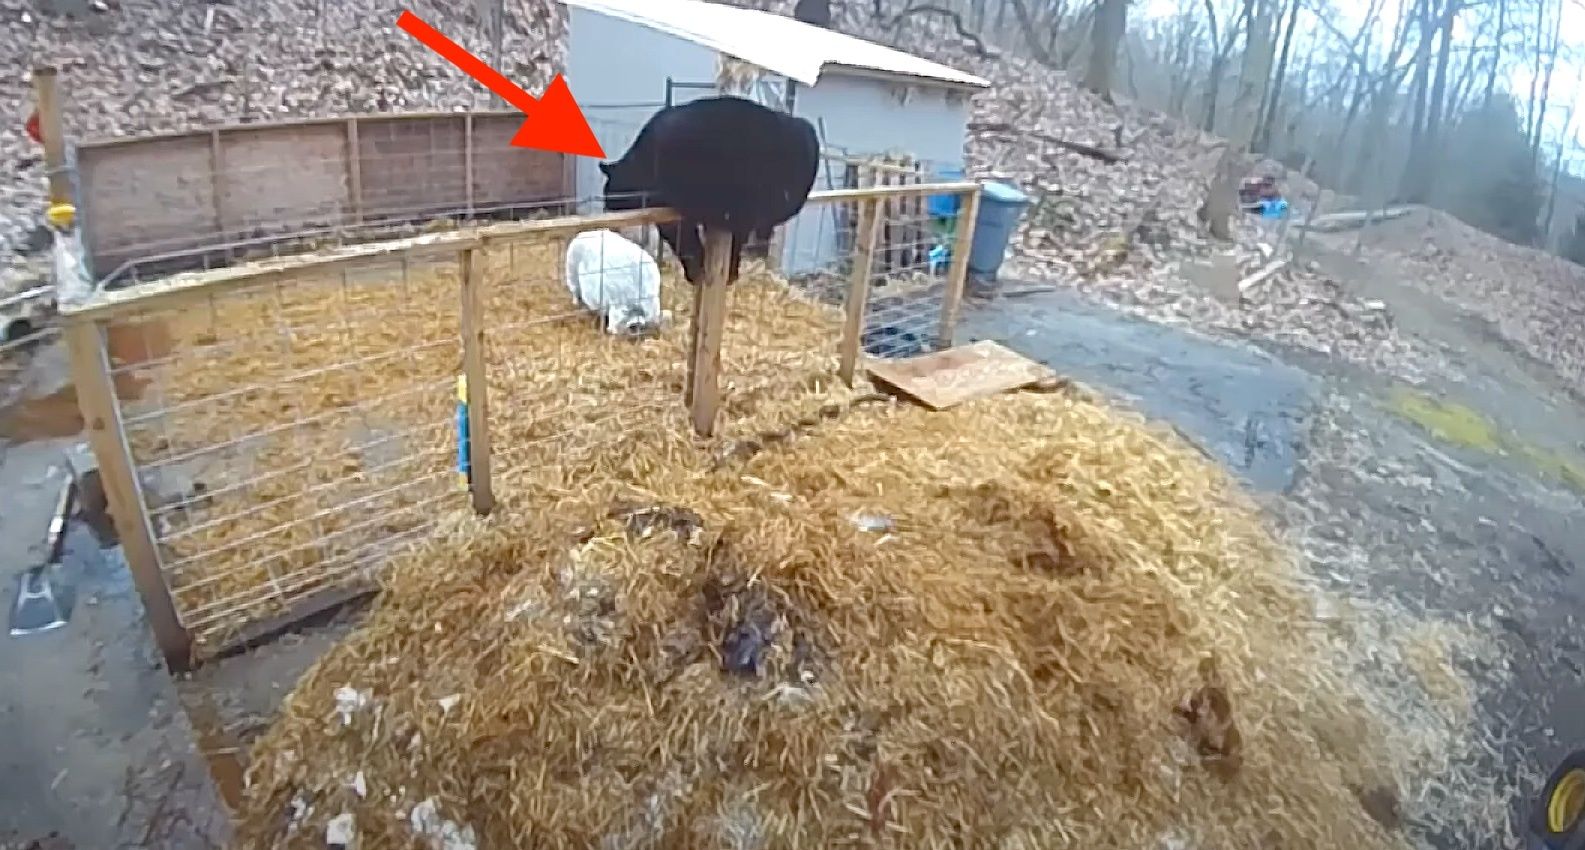 A Bear Quickly Found Himself In A Life-Or-Death Fight-Watch Bear Vs Pigs Fight Viral Footage 